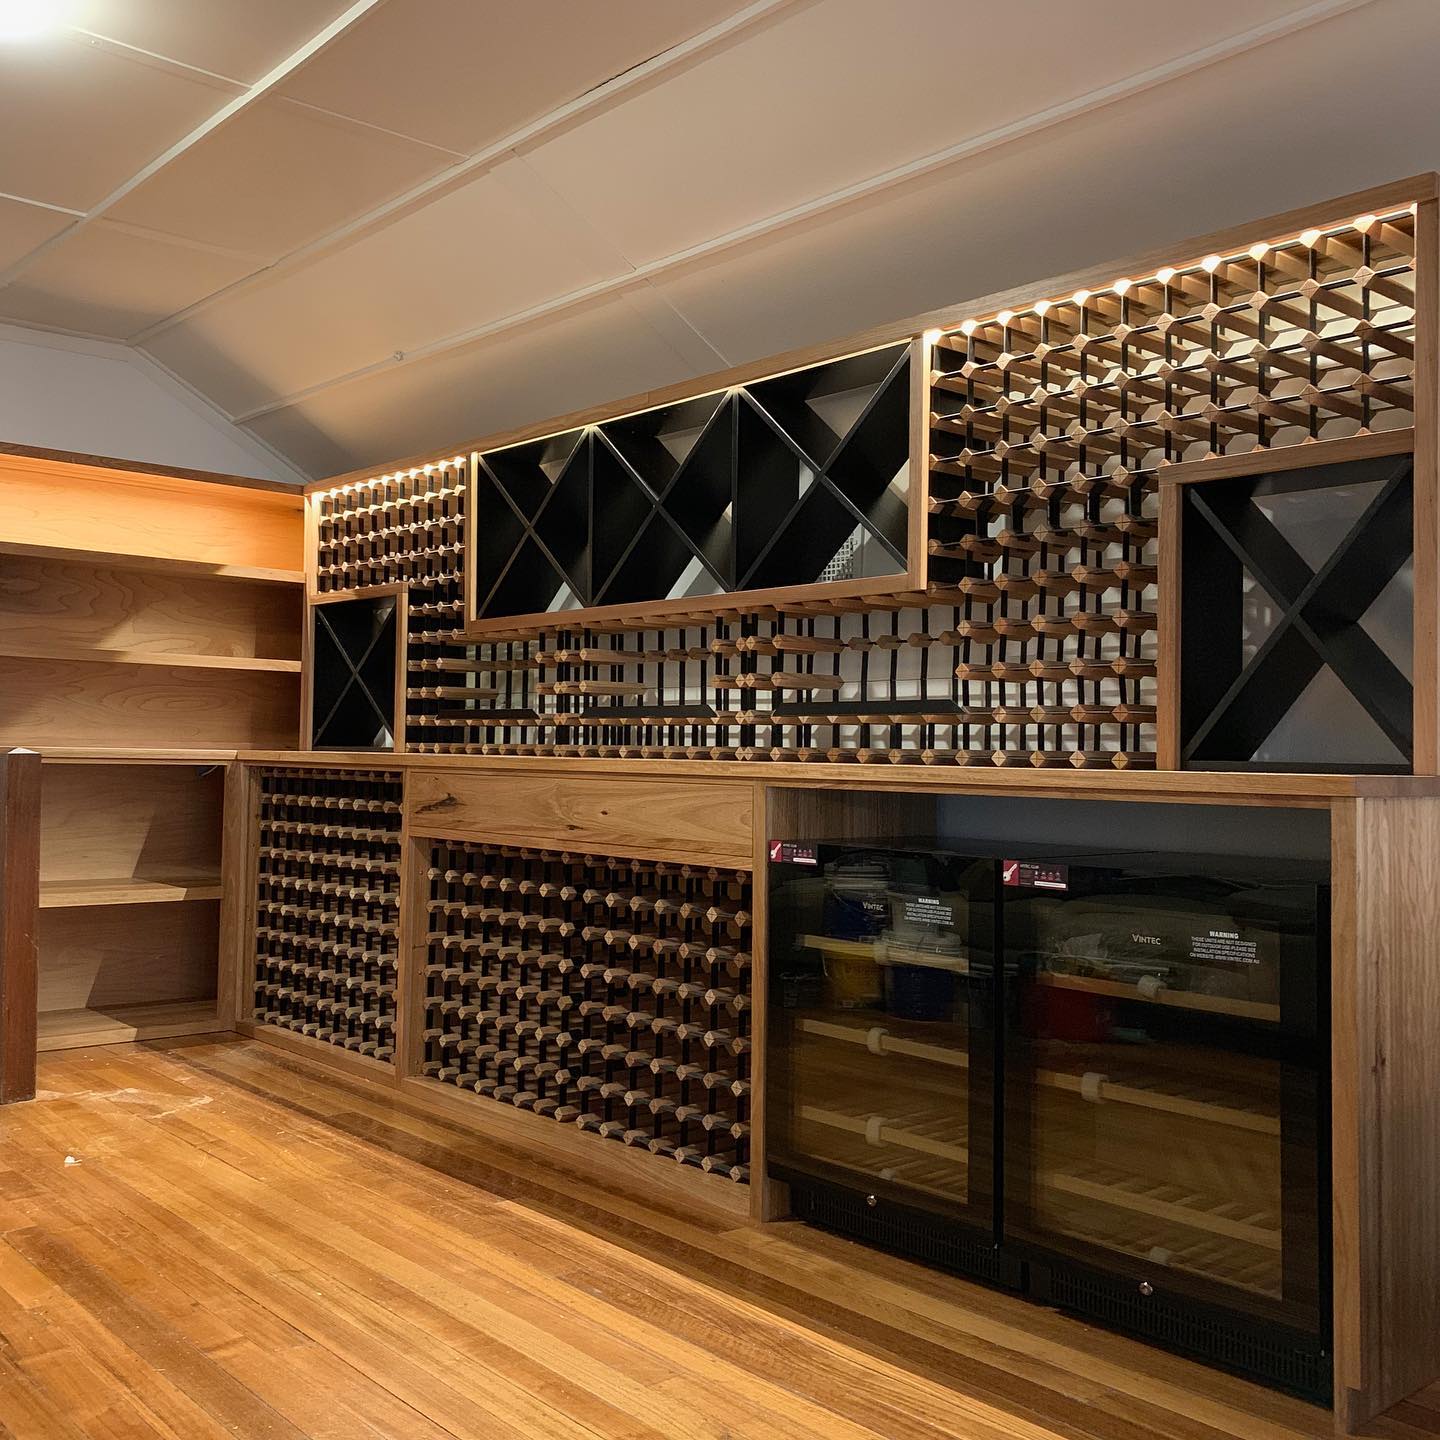 What wines are suitable for long term wine storage?